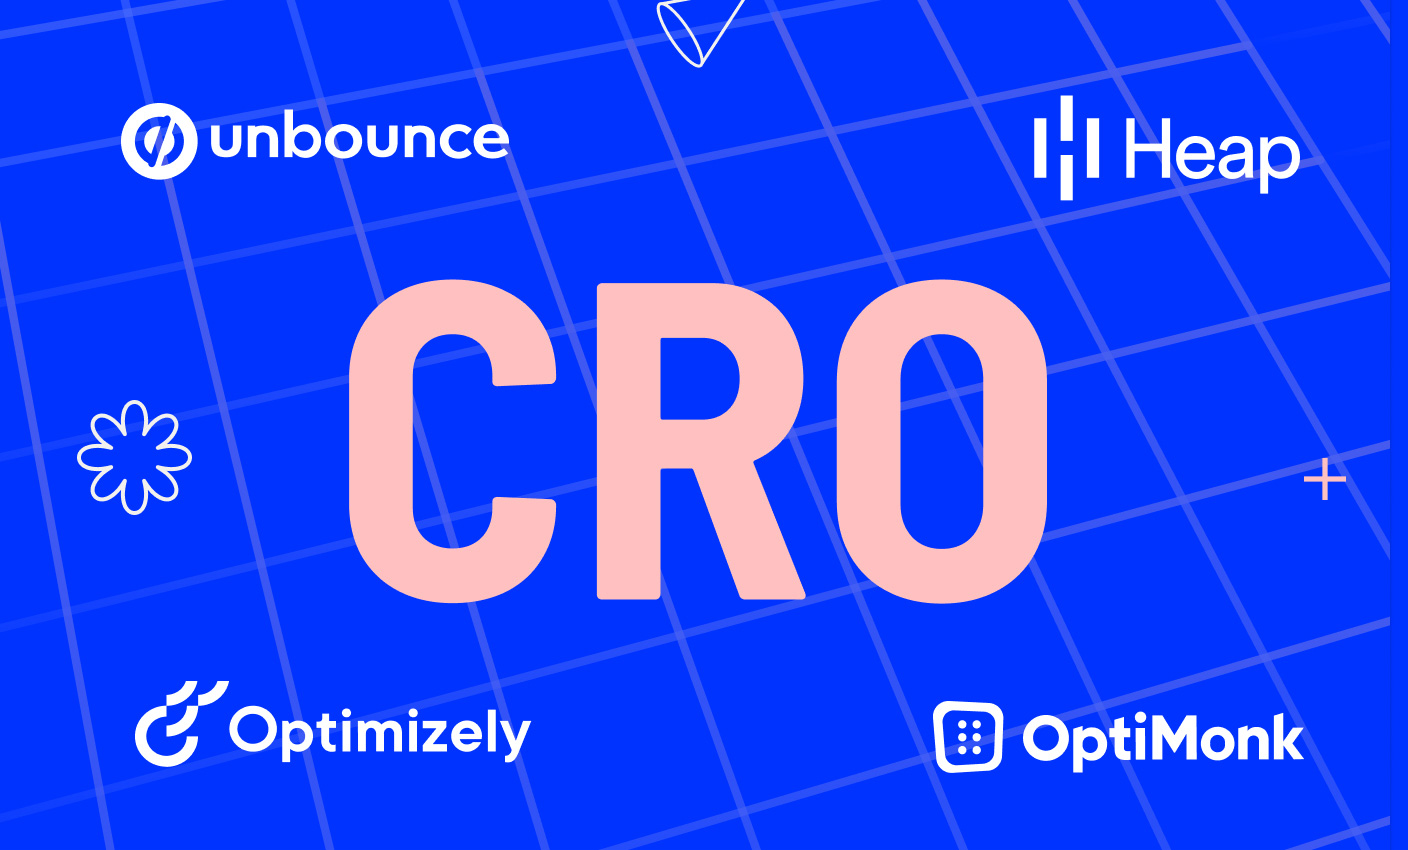 32 CRO tools you need in your marketing stack 